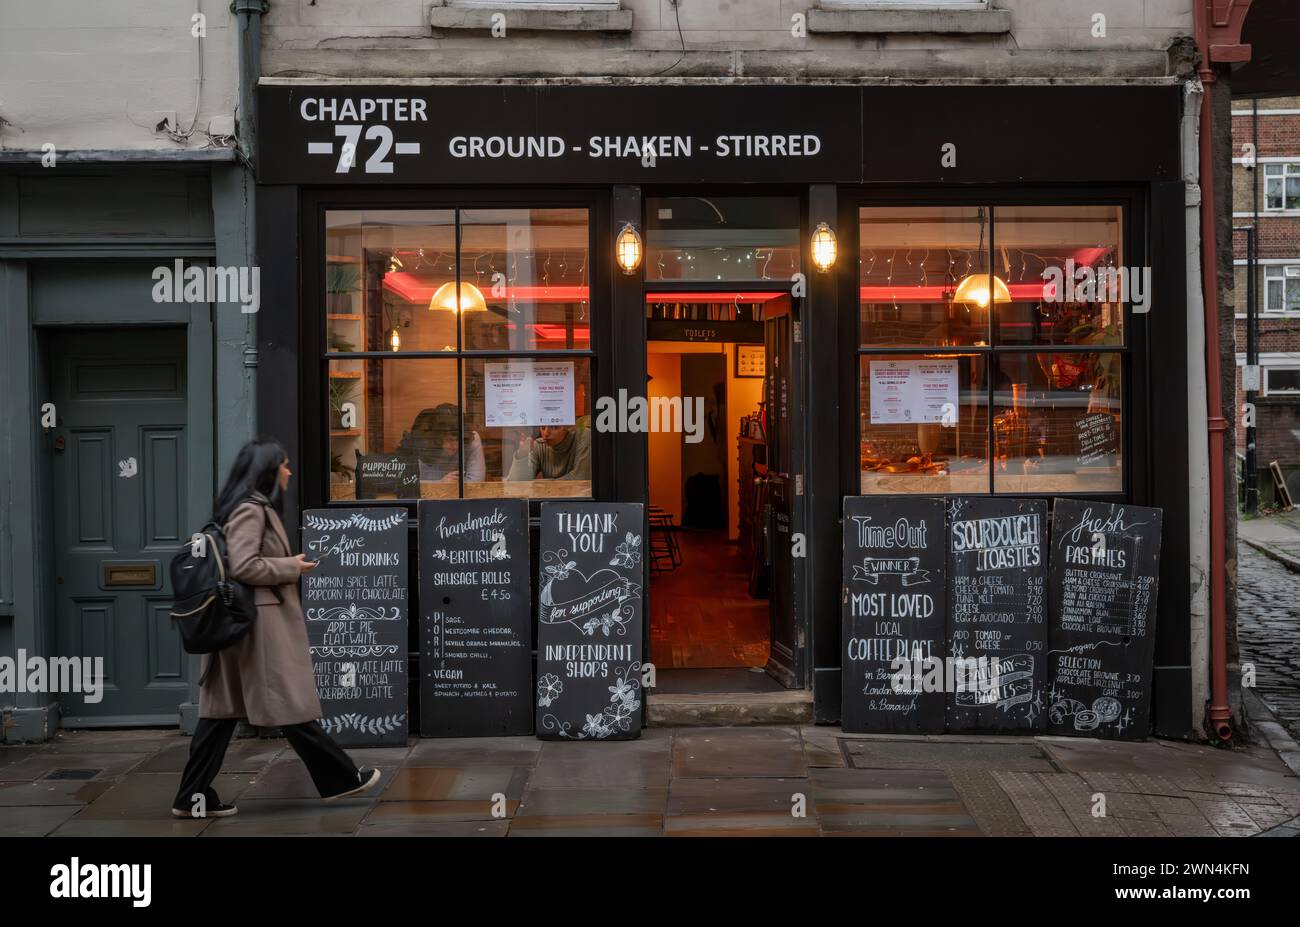 Bermondsey, London, UK: Chapter 72, one of many small cafes, restaurants and coffee shops along Bermondsey Street in the London borough of Southwark. Stock Photo